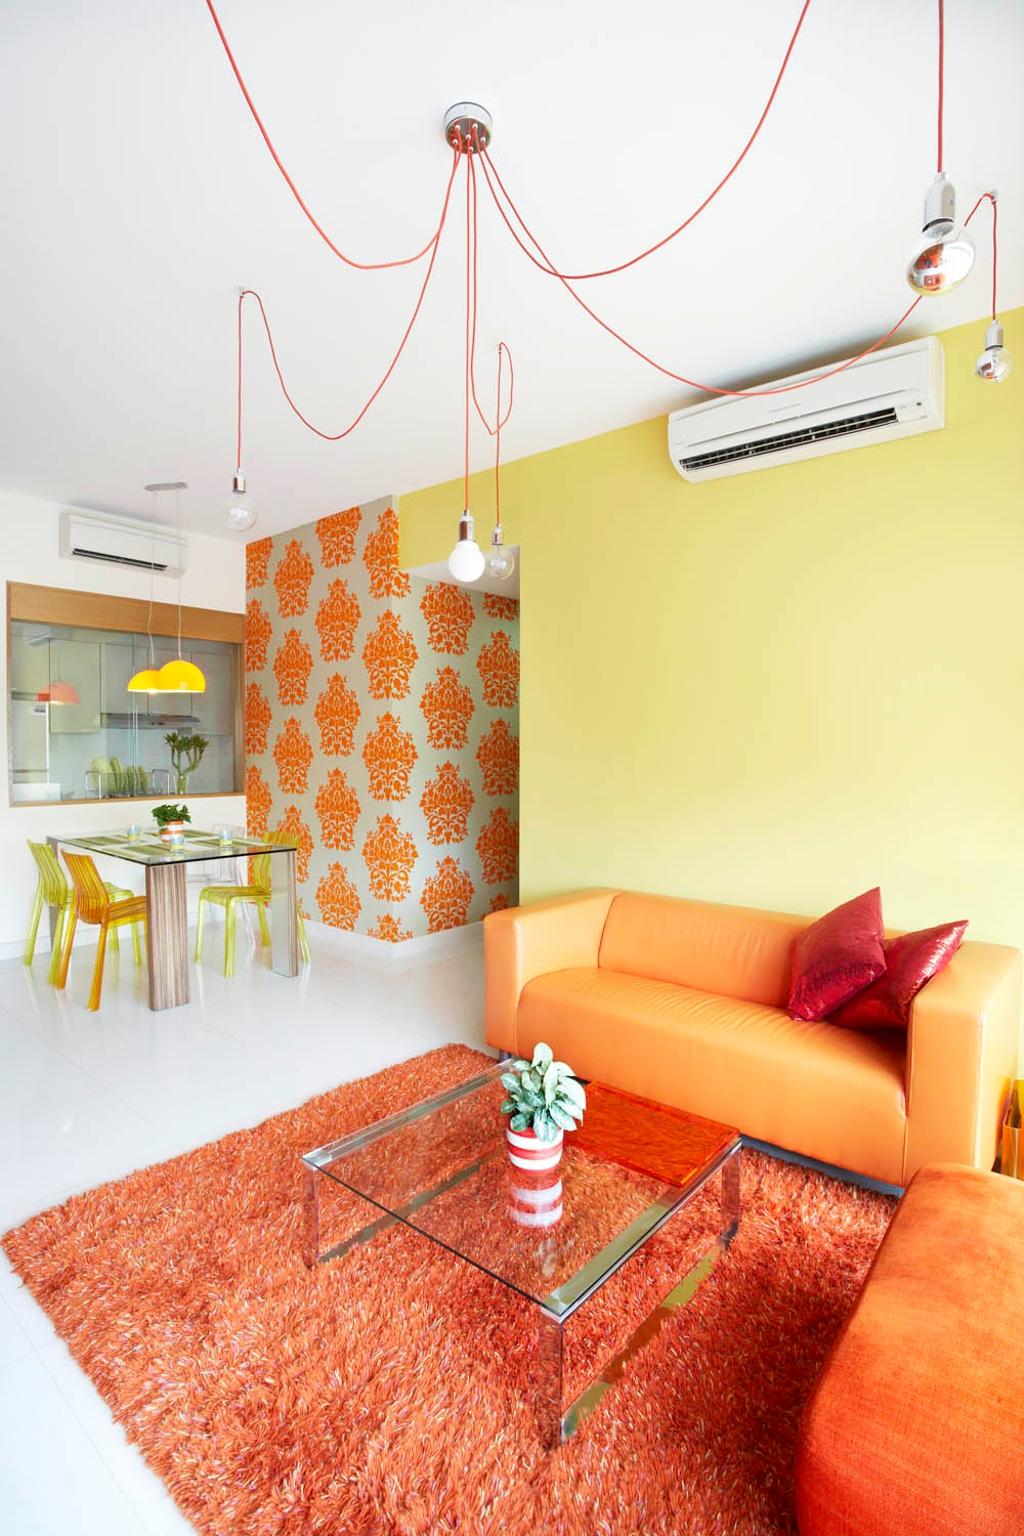 Eclectic, Condo, Living Room, Starville, Interior Designer, Free Space Intent, Glass Table Top, Carpet, Orange Sofa, Yellow Wall, Wallpaper, Exposed Lighbulb, Hanging Light, Glass Coffee Table, Dining Table, Furniture, Table, Couch, Indoors, Interior Design, Home Decor, Linen, Tablecloth, Room